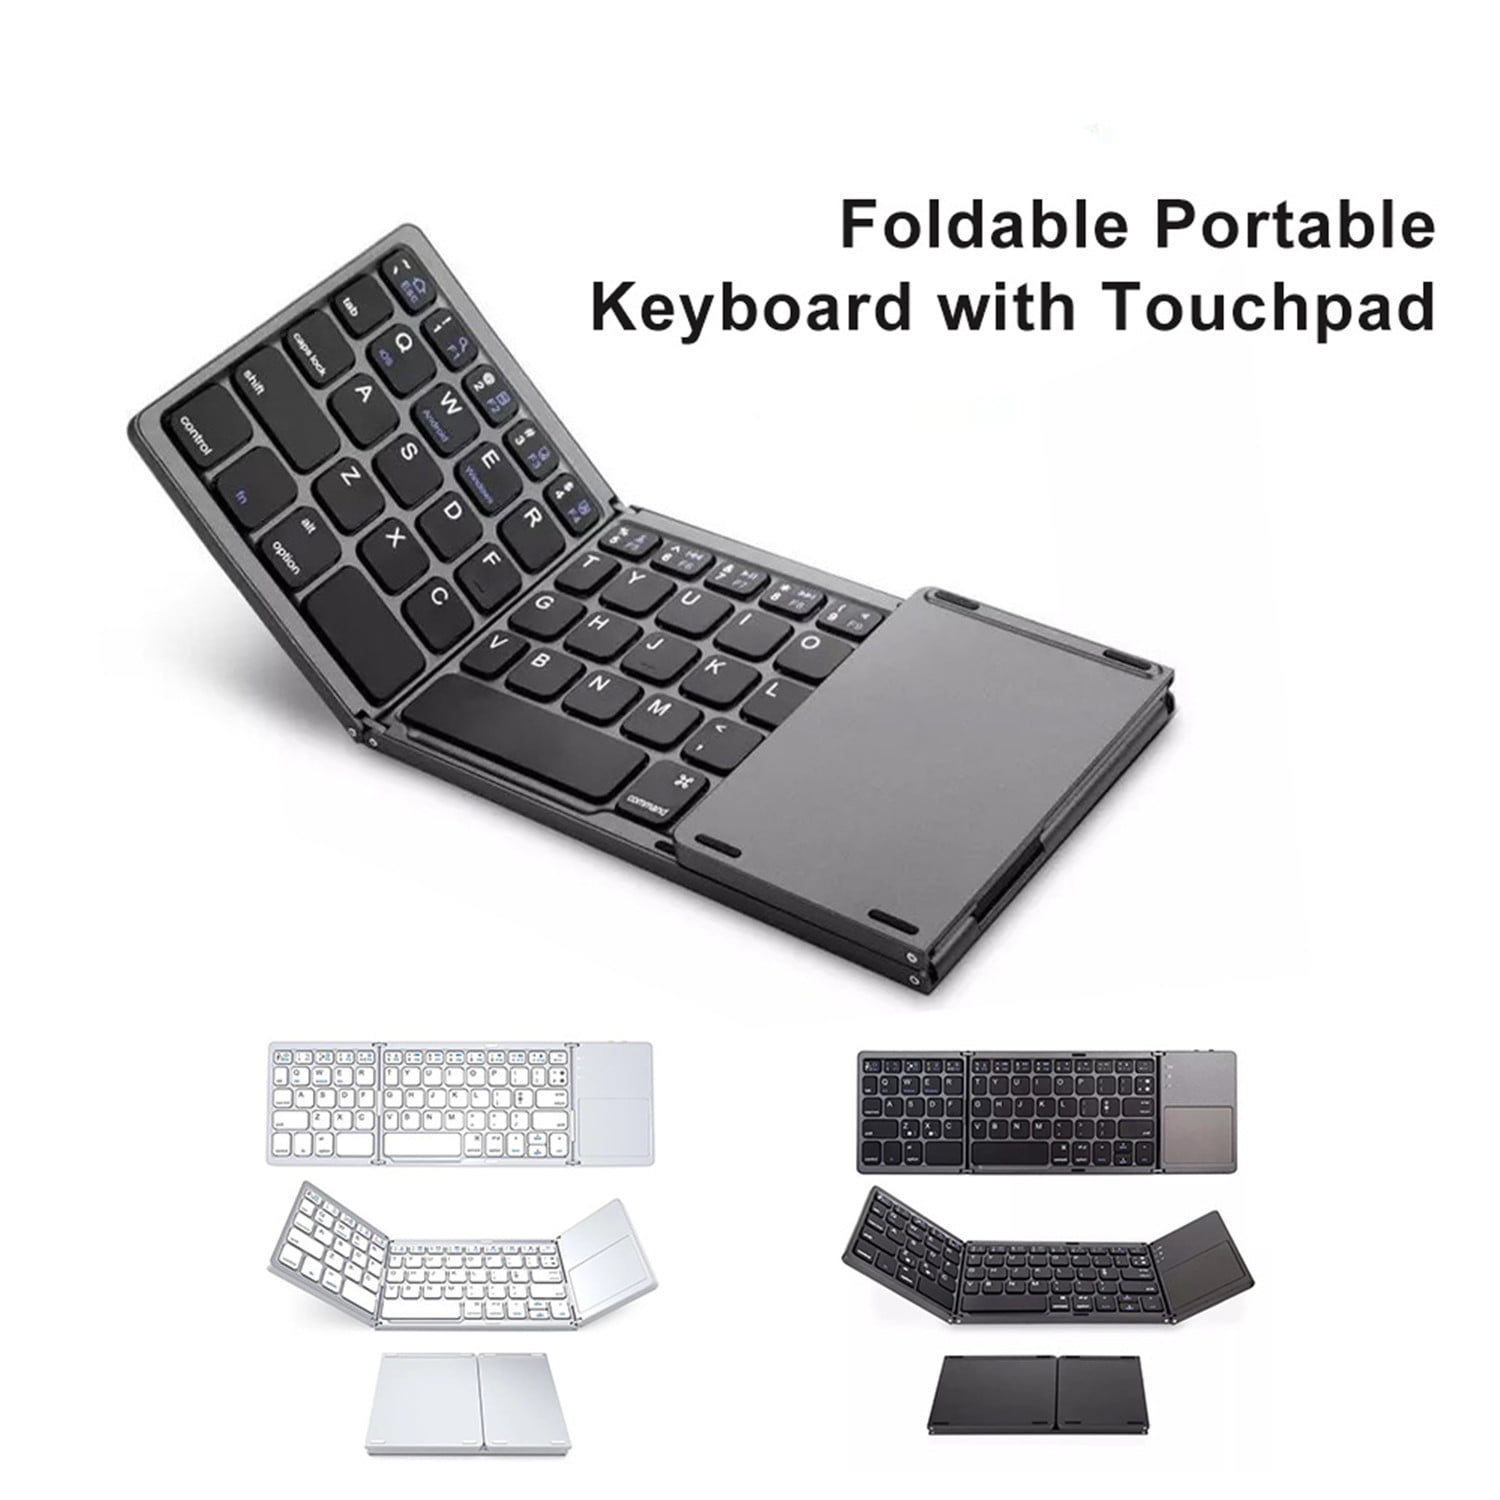 Tek Styz Foldable Bluetooth Keyboard Works for Xiaomi Redmi Note 8 Pro Dual Mode Bluetooth & USB Wired Rechargable Portable Mini BT Wireless Keyboard with Touchpad Mouse! 